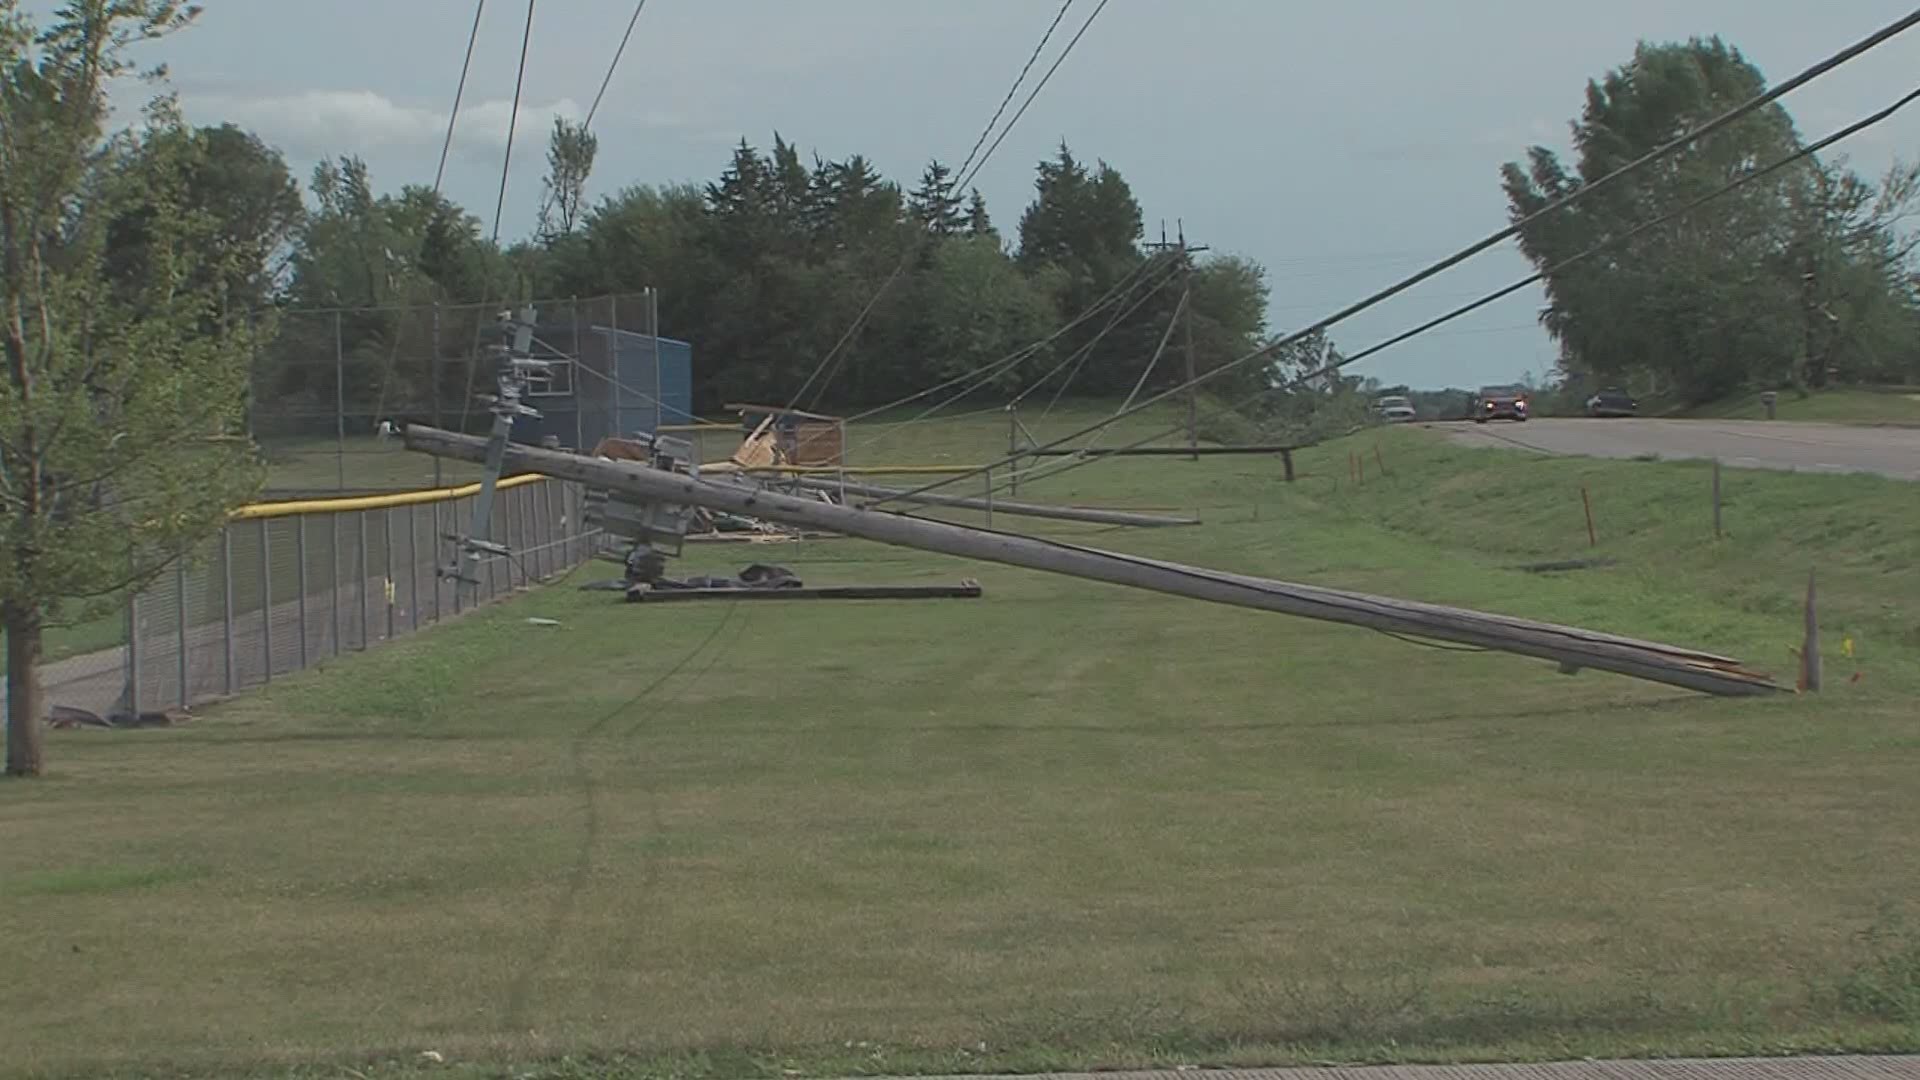 An EF-3 tornado ripped through Marshalltown two years ago, causing massive amounts of damage. Now, the people of Marshalltown are having to clean up all over again.